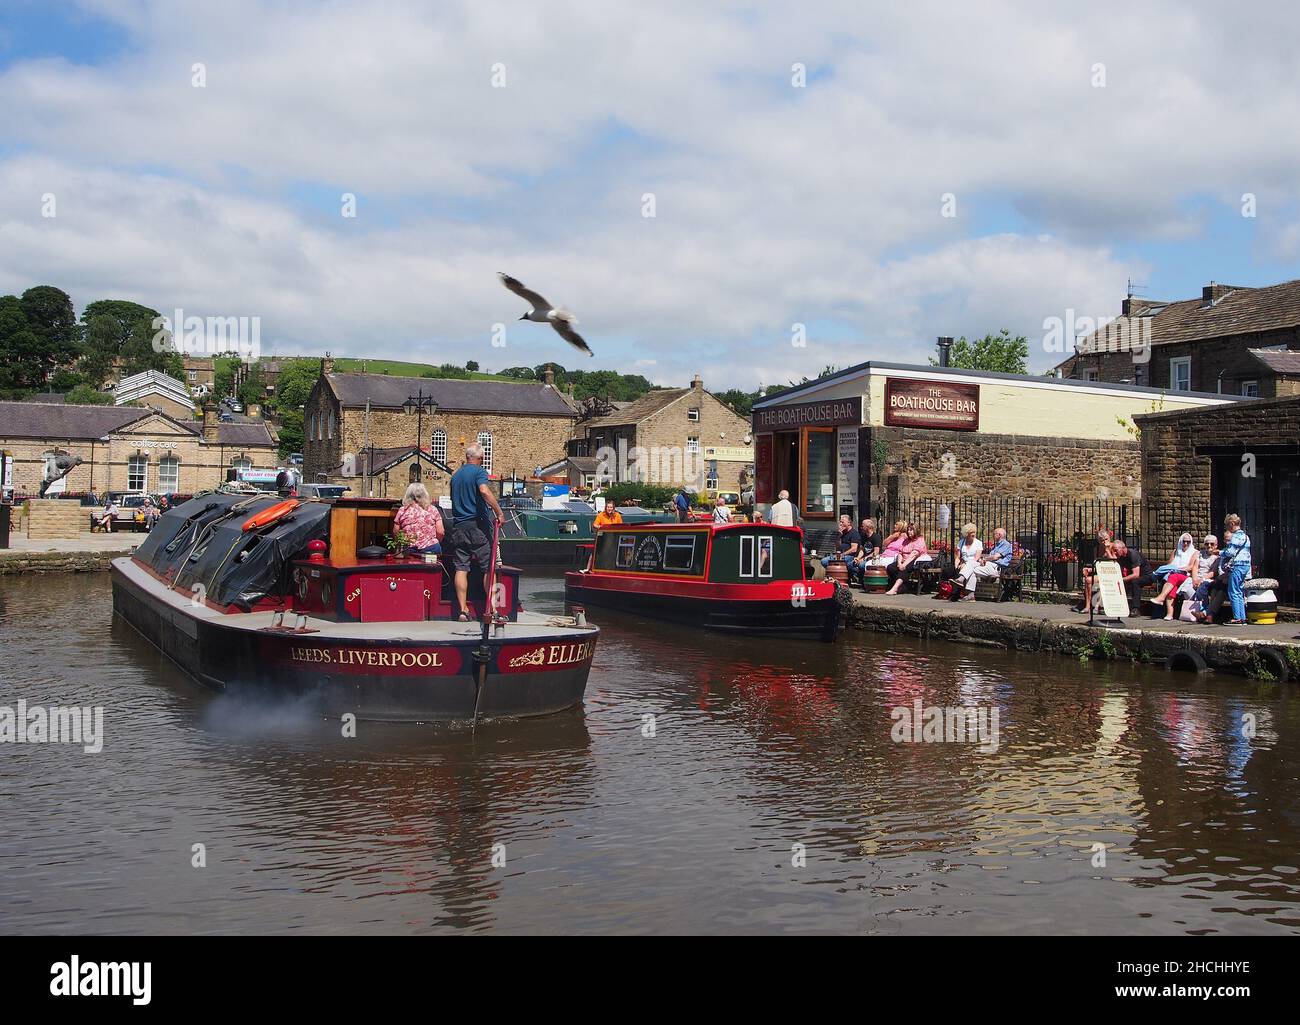 SKIPTON CANAL BASIN, WHERE THE THANET CANAL OR SPRINGS BRANCH LEAVES THE LEEDS AND LIVERPOOL CANAL AND RUNS TO SKIPTON CASTLE. Stock Photo